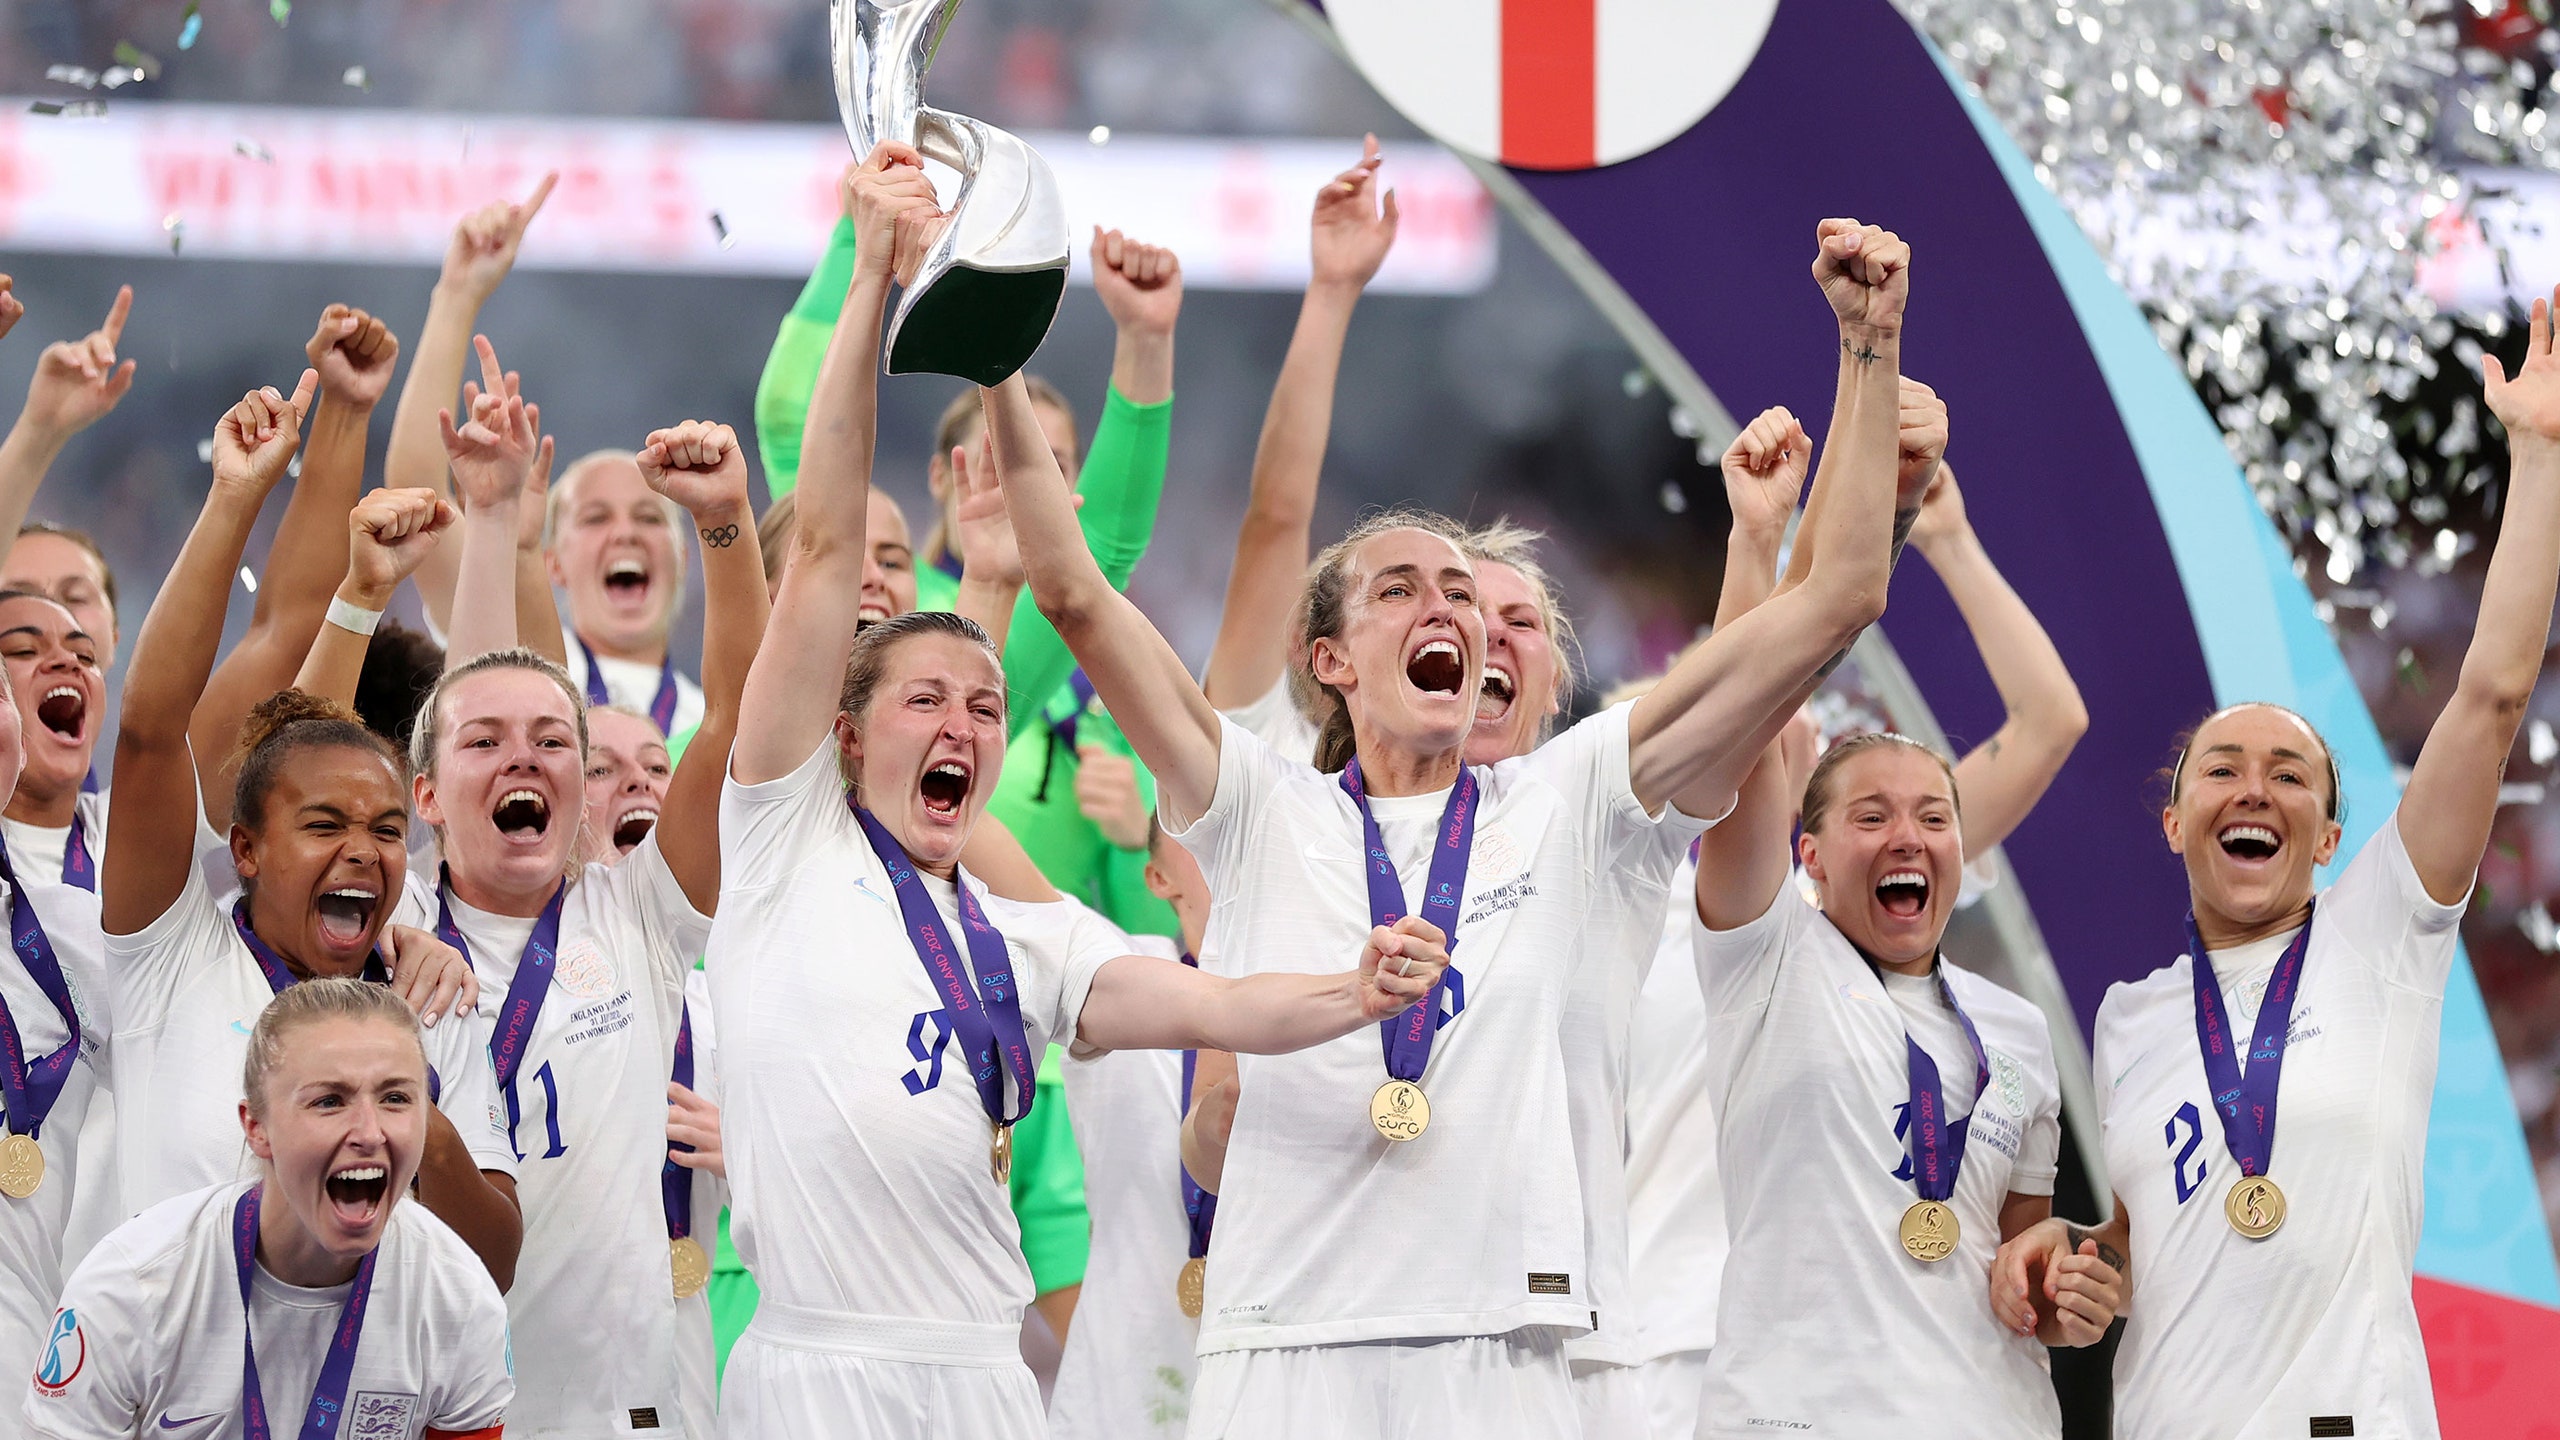 2022 Winners: From Meghan Markle To The England Women's Football Team